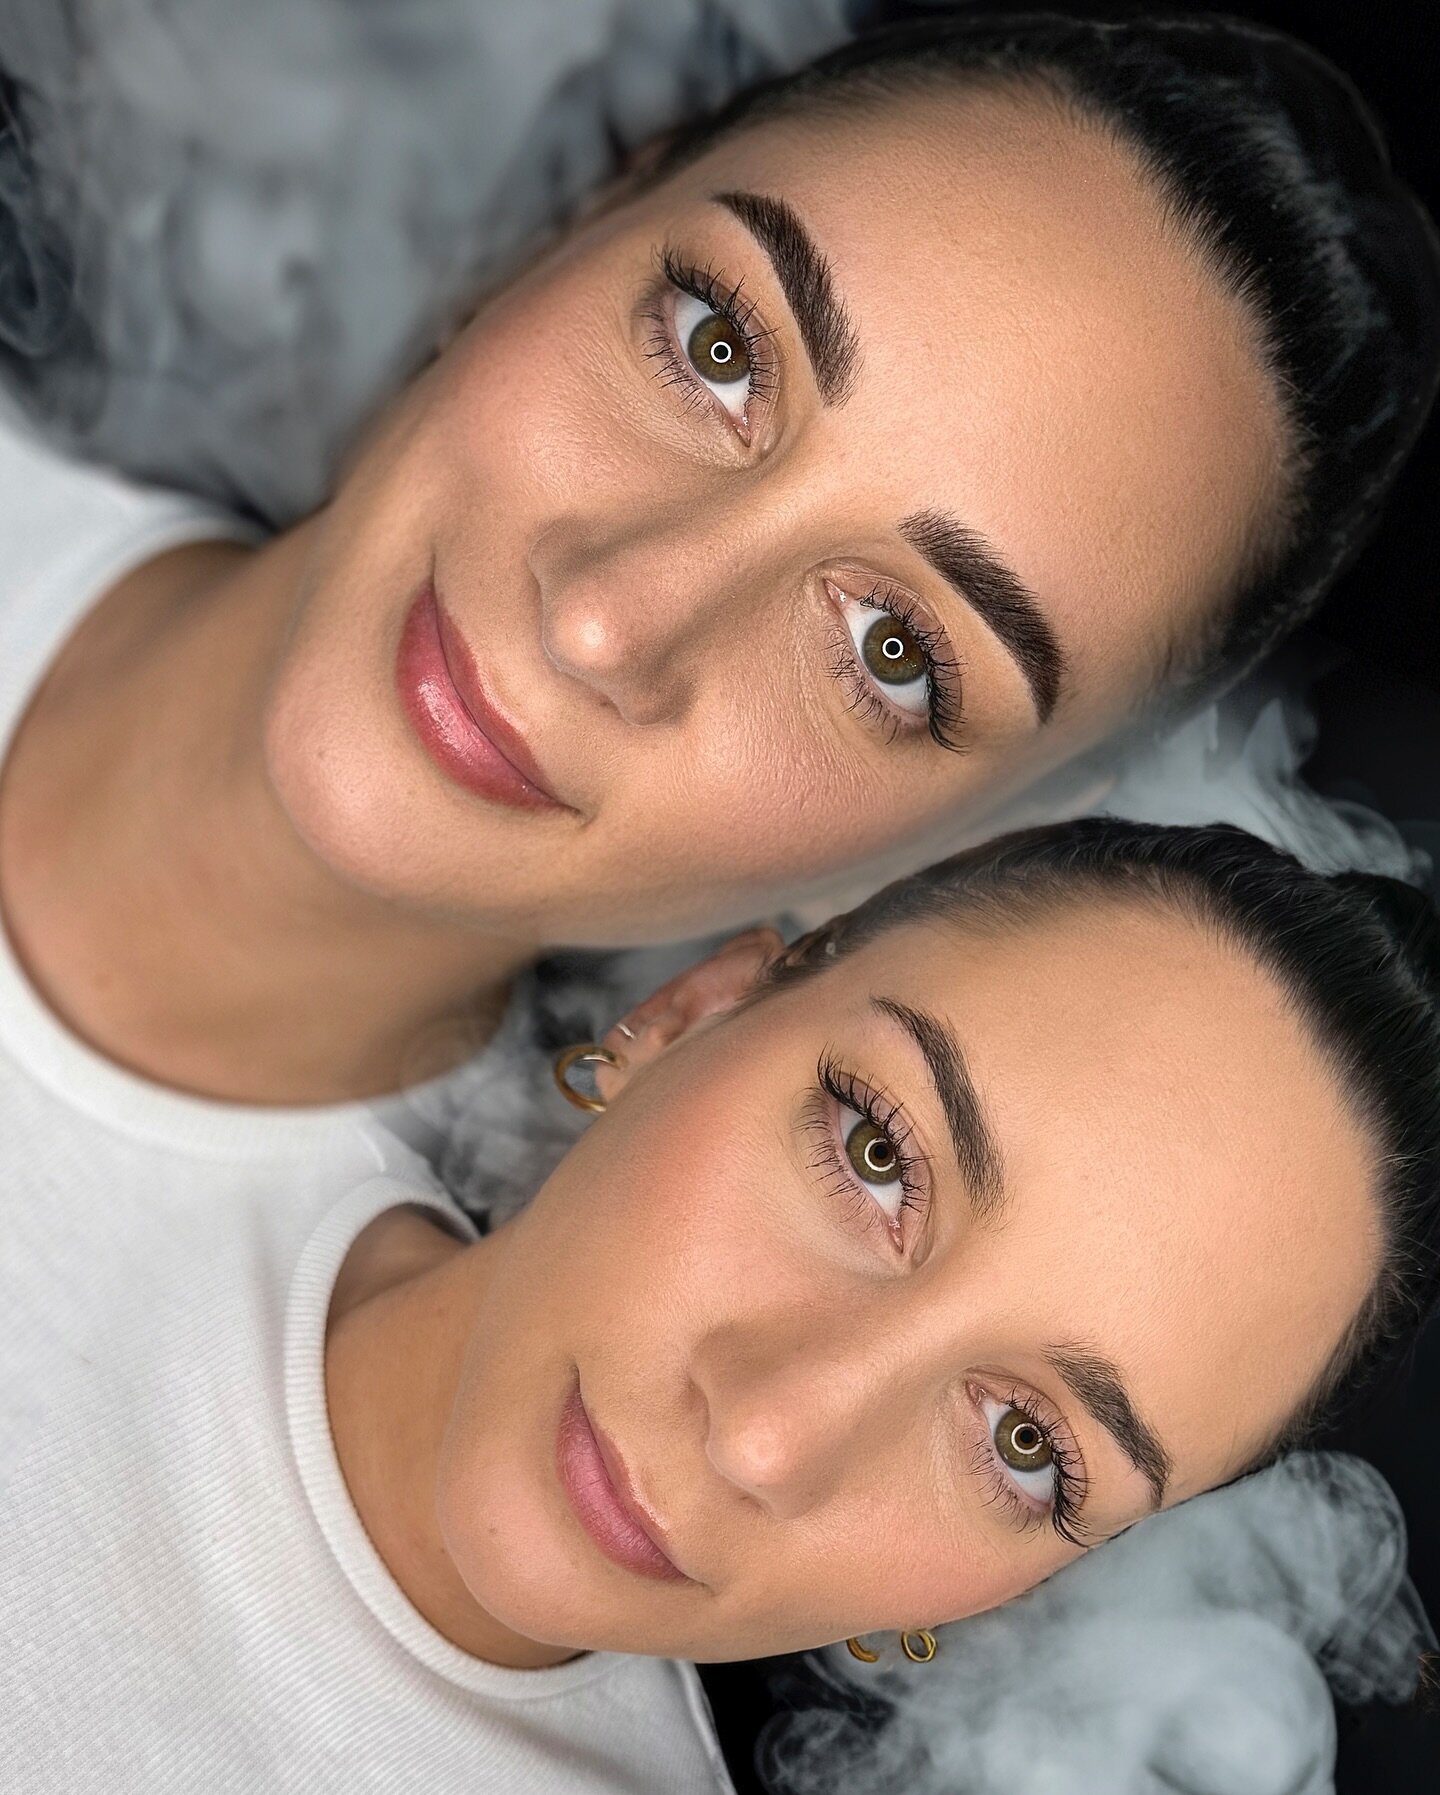 My exclusive technique producing exquisite results for clients in pursuit of effortlessly natural brows, free from the concern of conspicuous tattoos.
💖Crafted for those craving sophistication without the tattooed aesthetic, this represents a cuttin